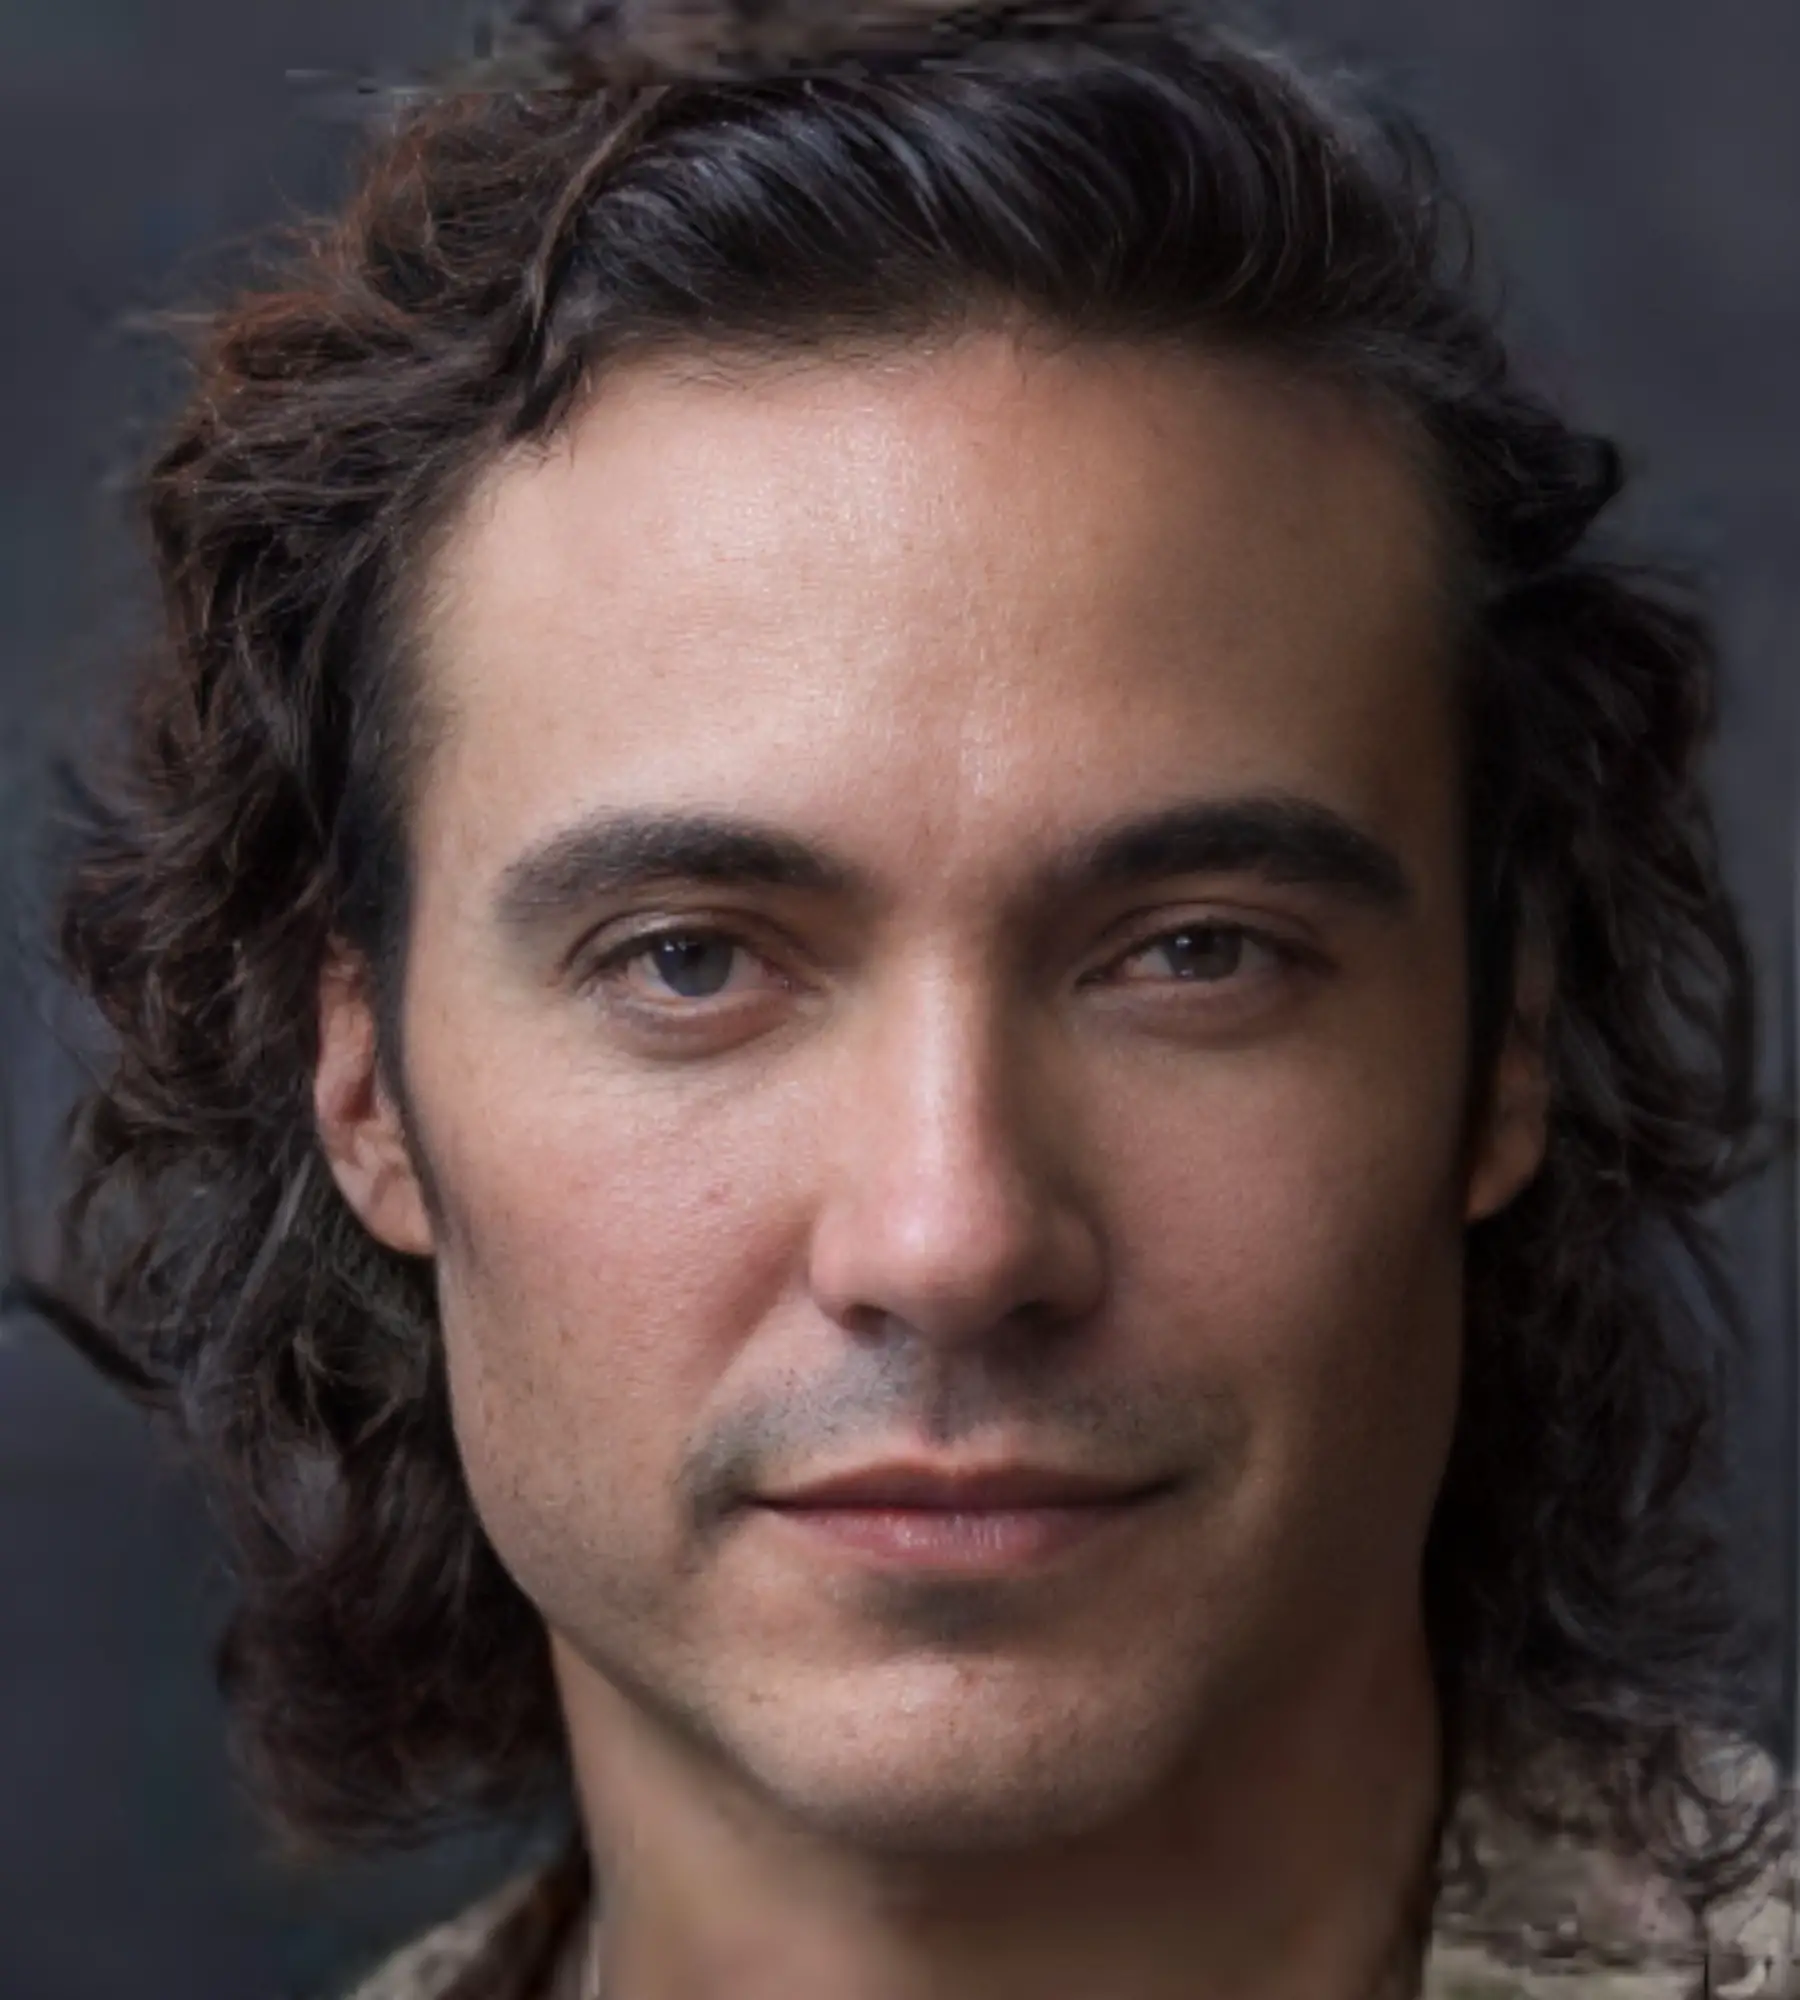 Martín Rodríguez (Actor) Age, Wiki, Bio, Height, Weight, Movies, TV Shows, Parents, Wife and More